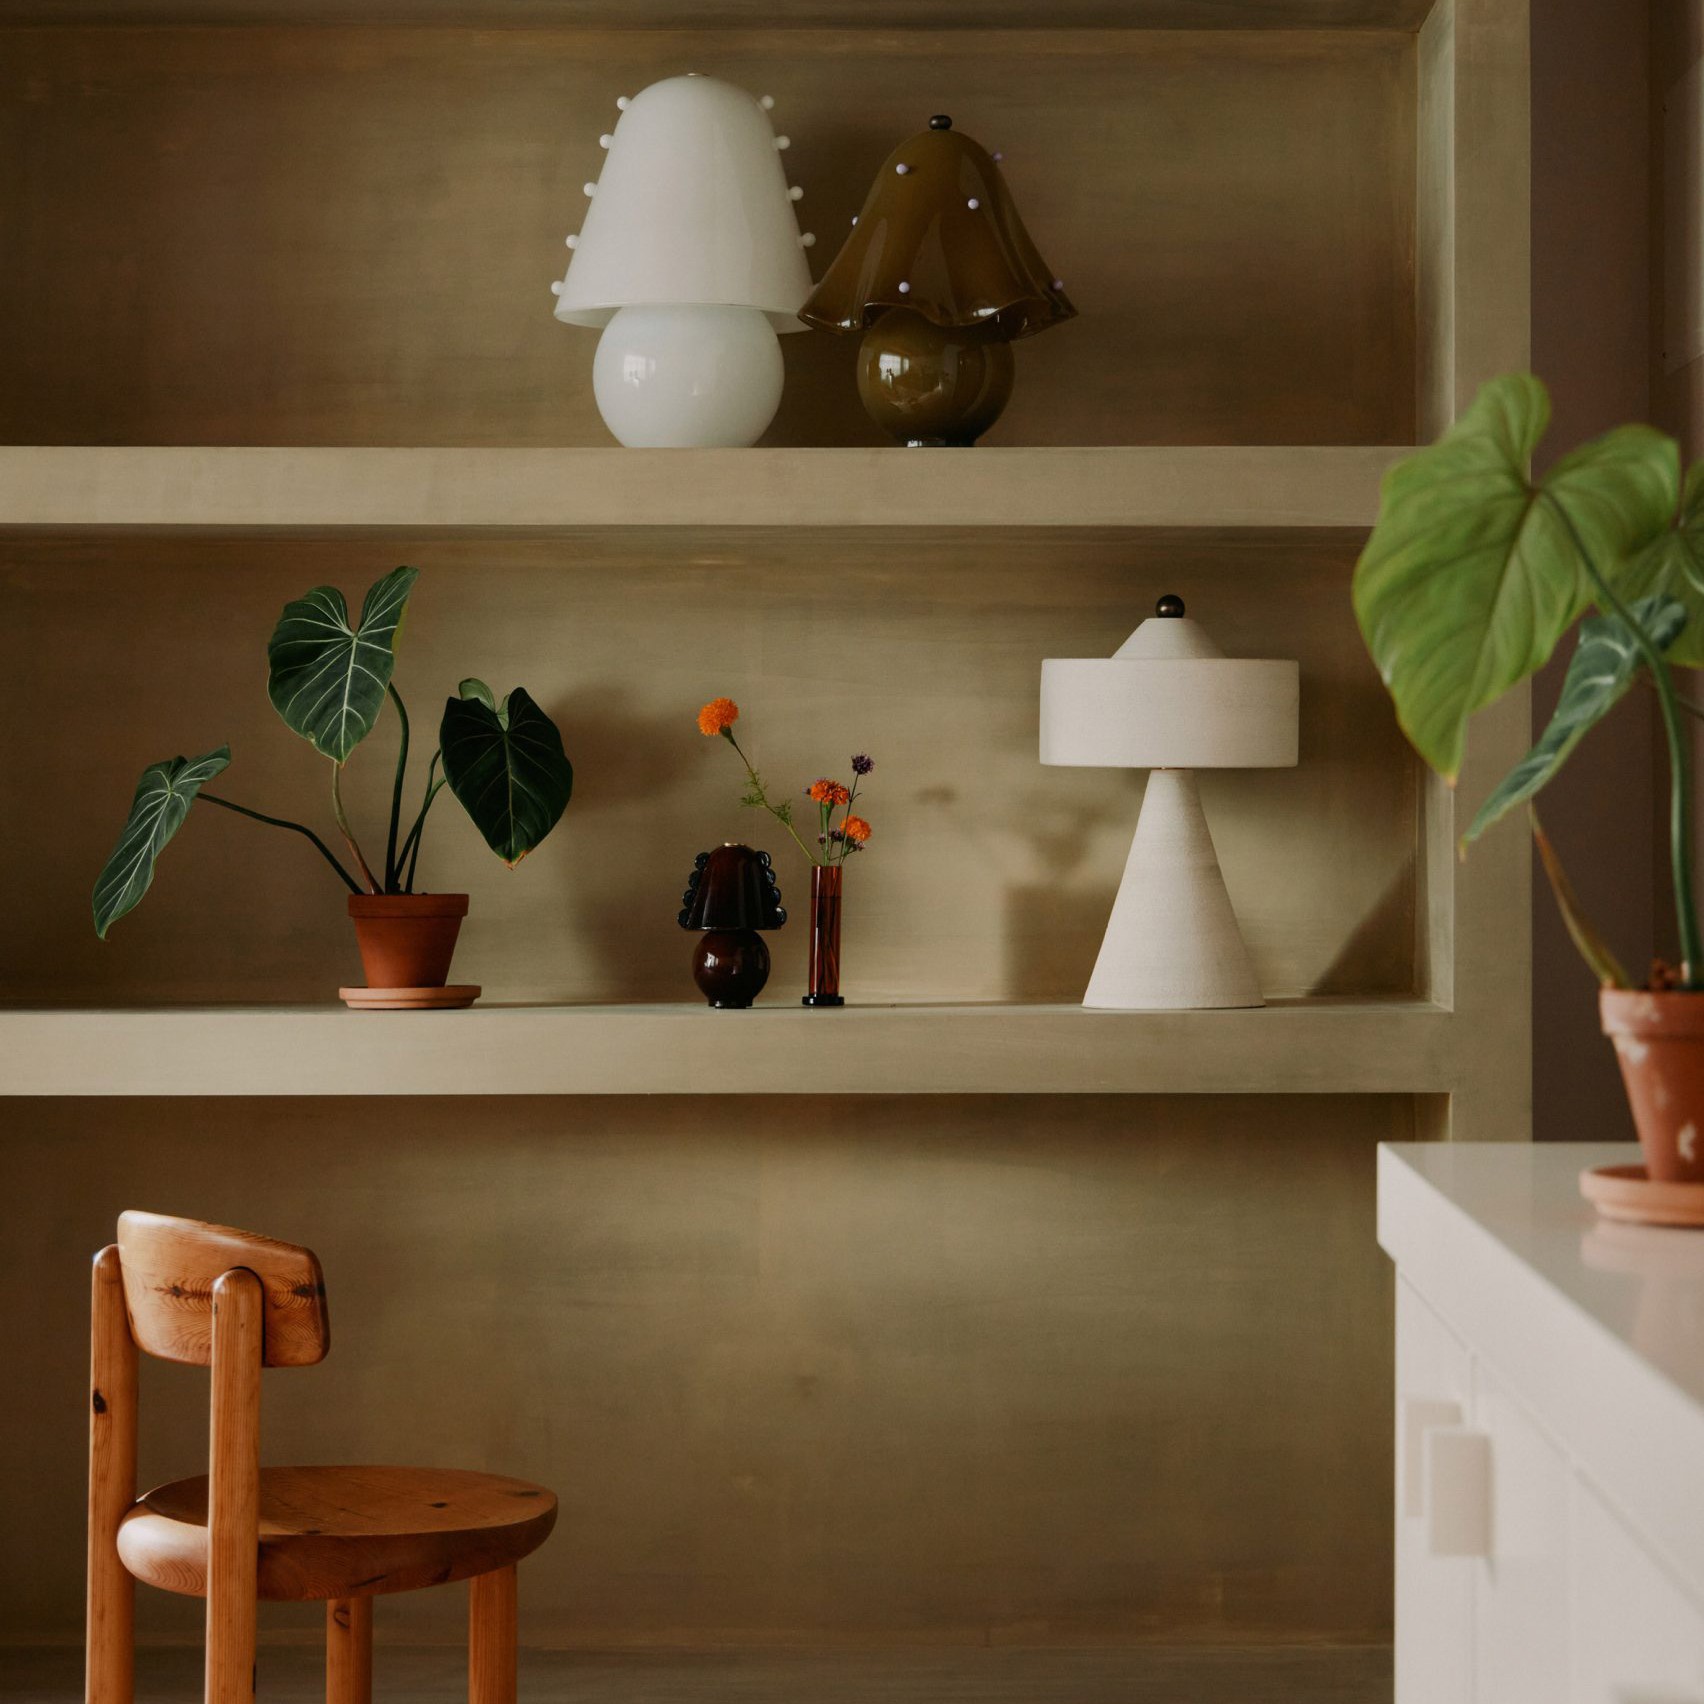 a wooden chair sitting in front of a shelf filled with potted plants